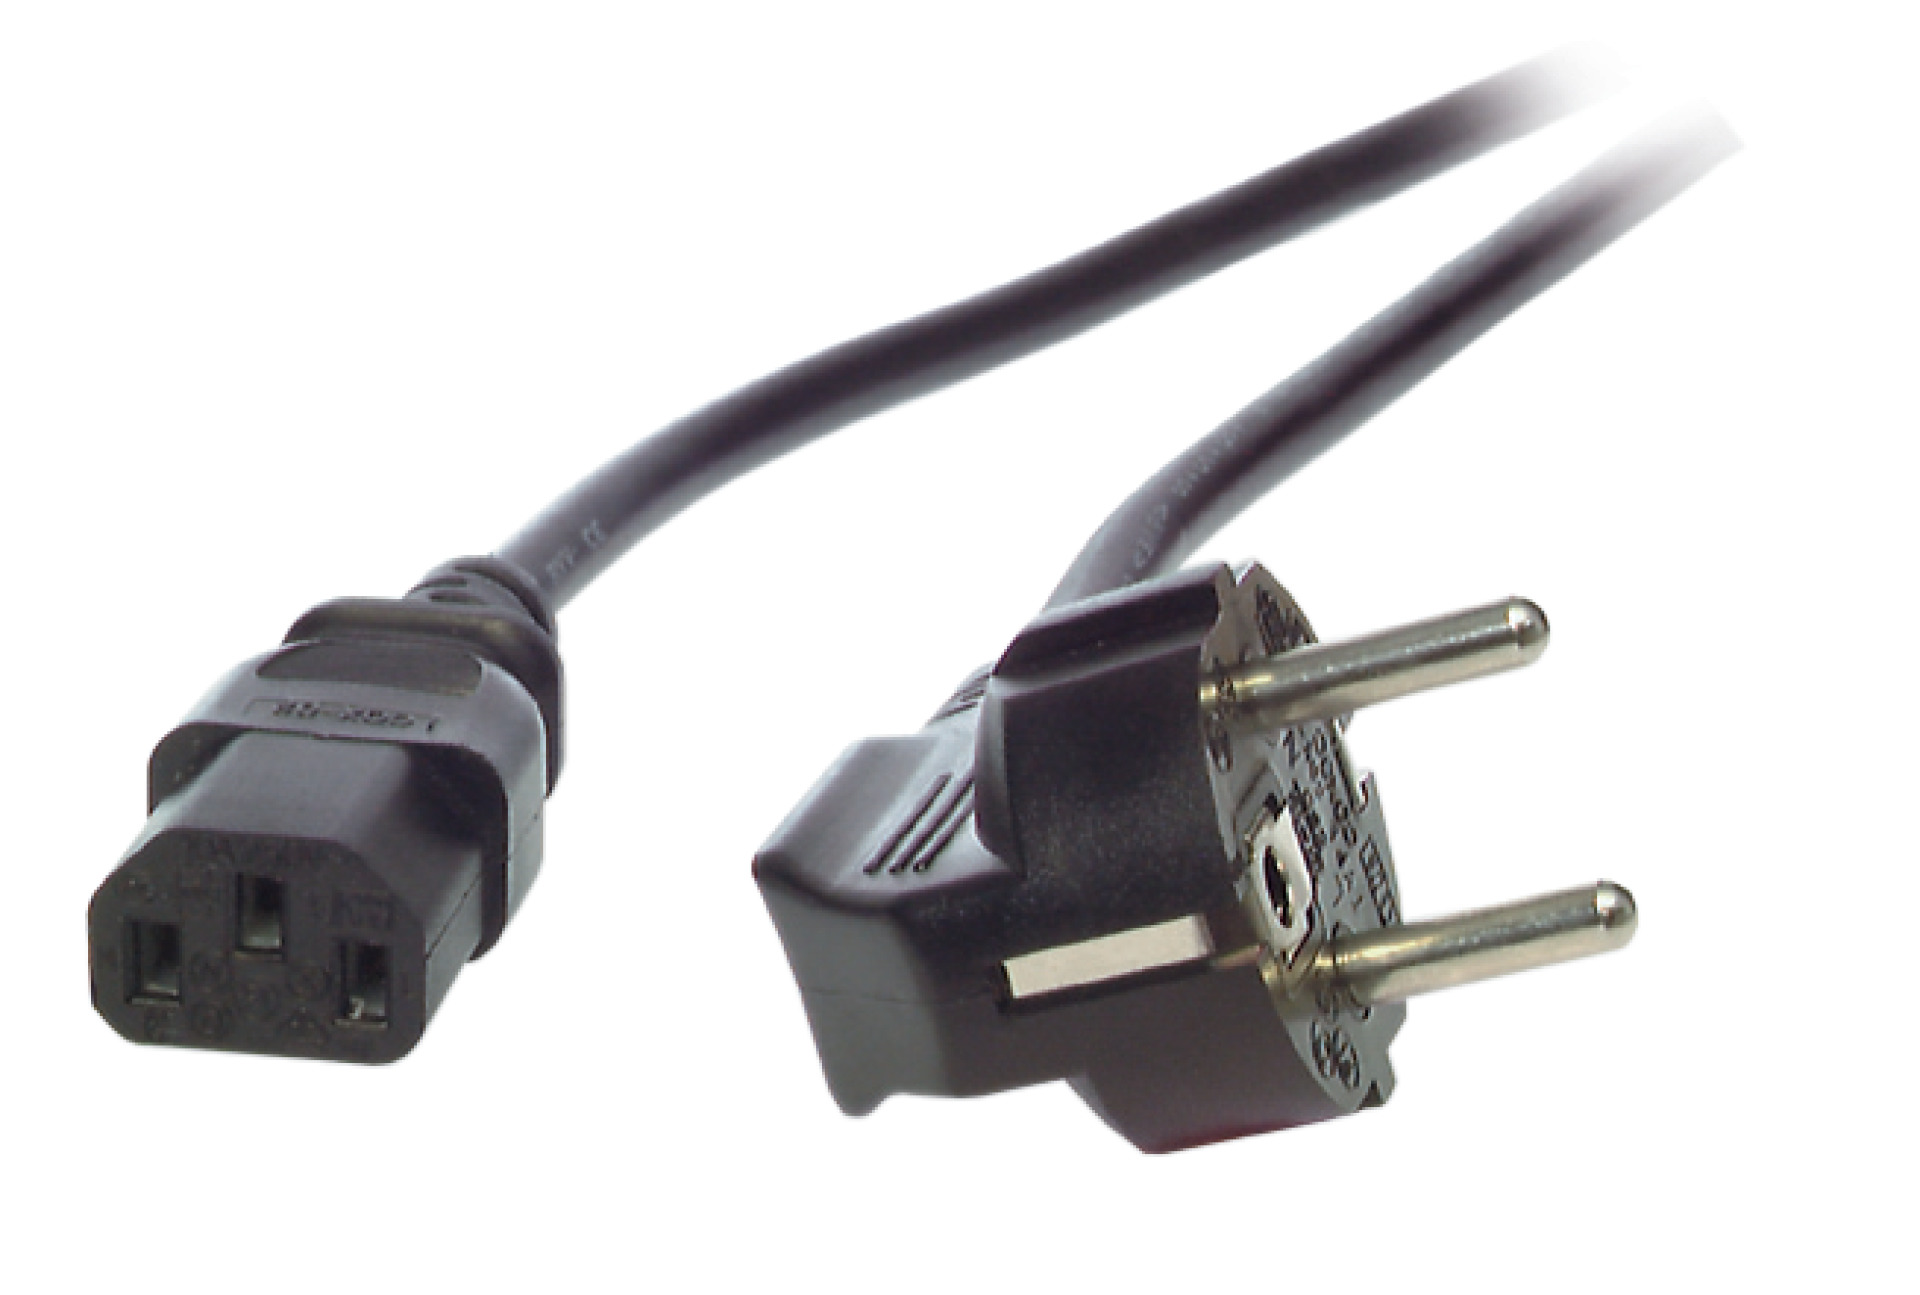 Purchase mains cables & more online from the expert